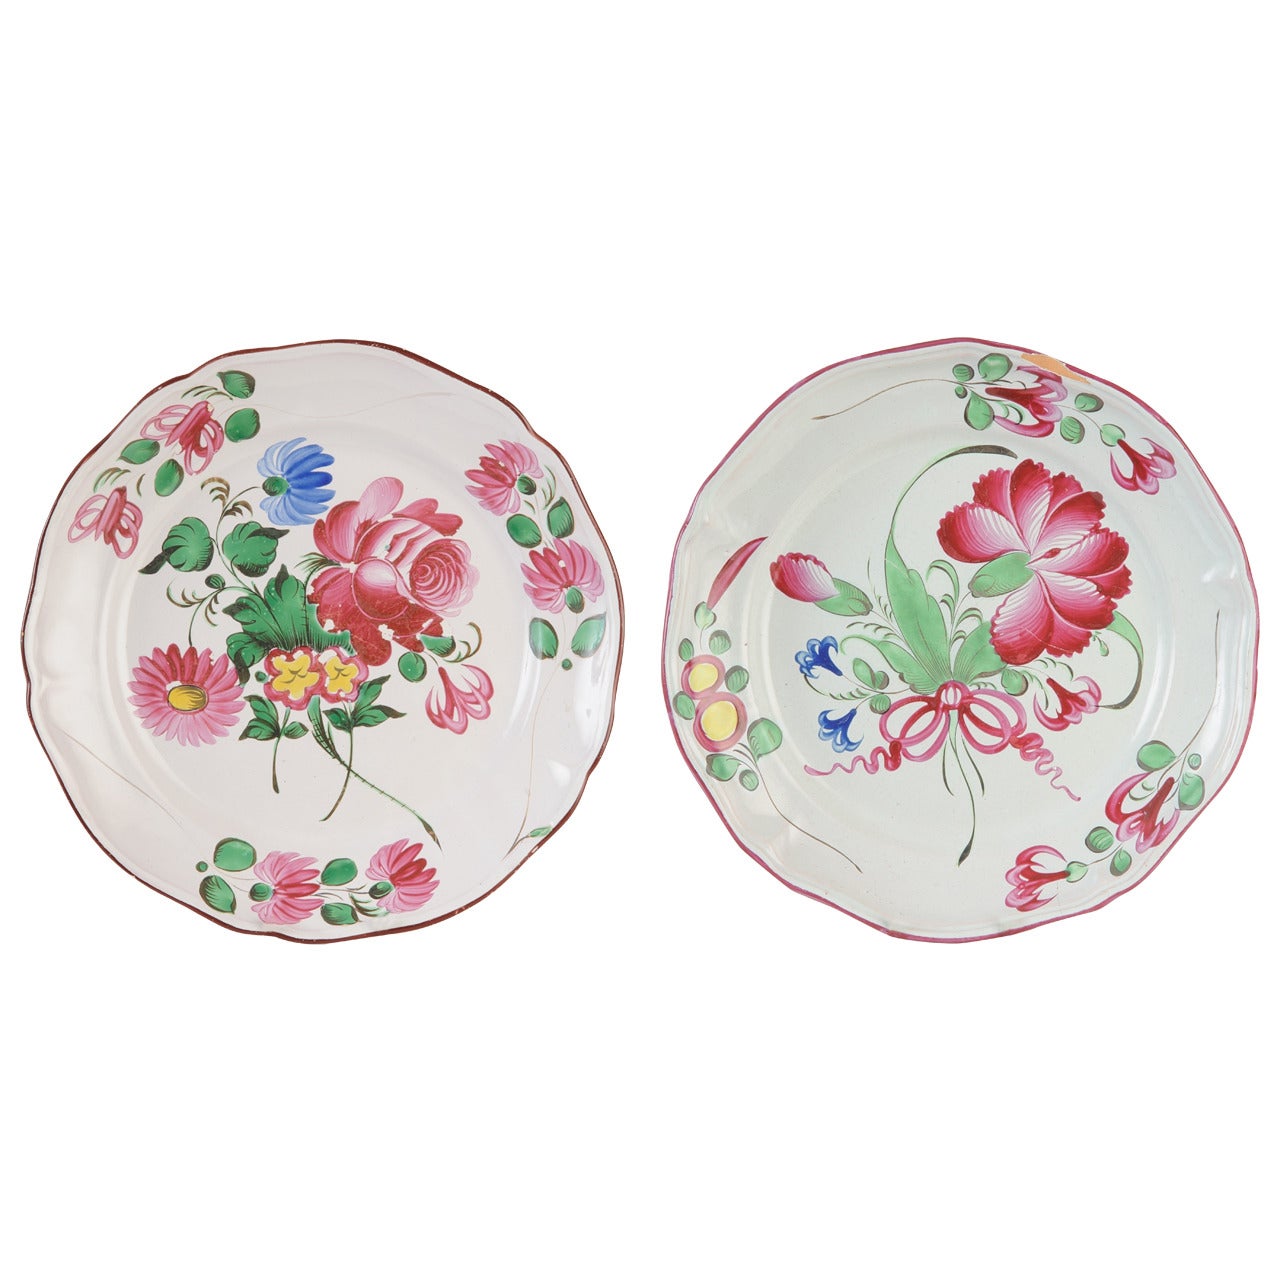 18th C French Luneville Faience Plates, Pair